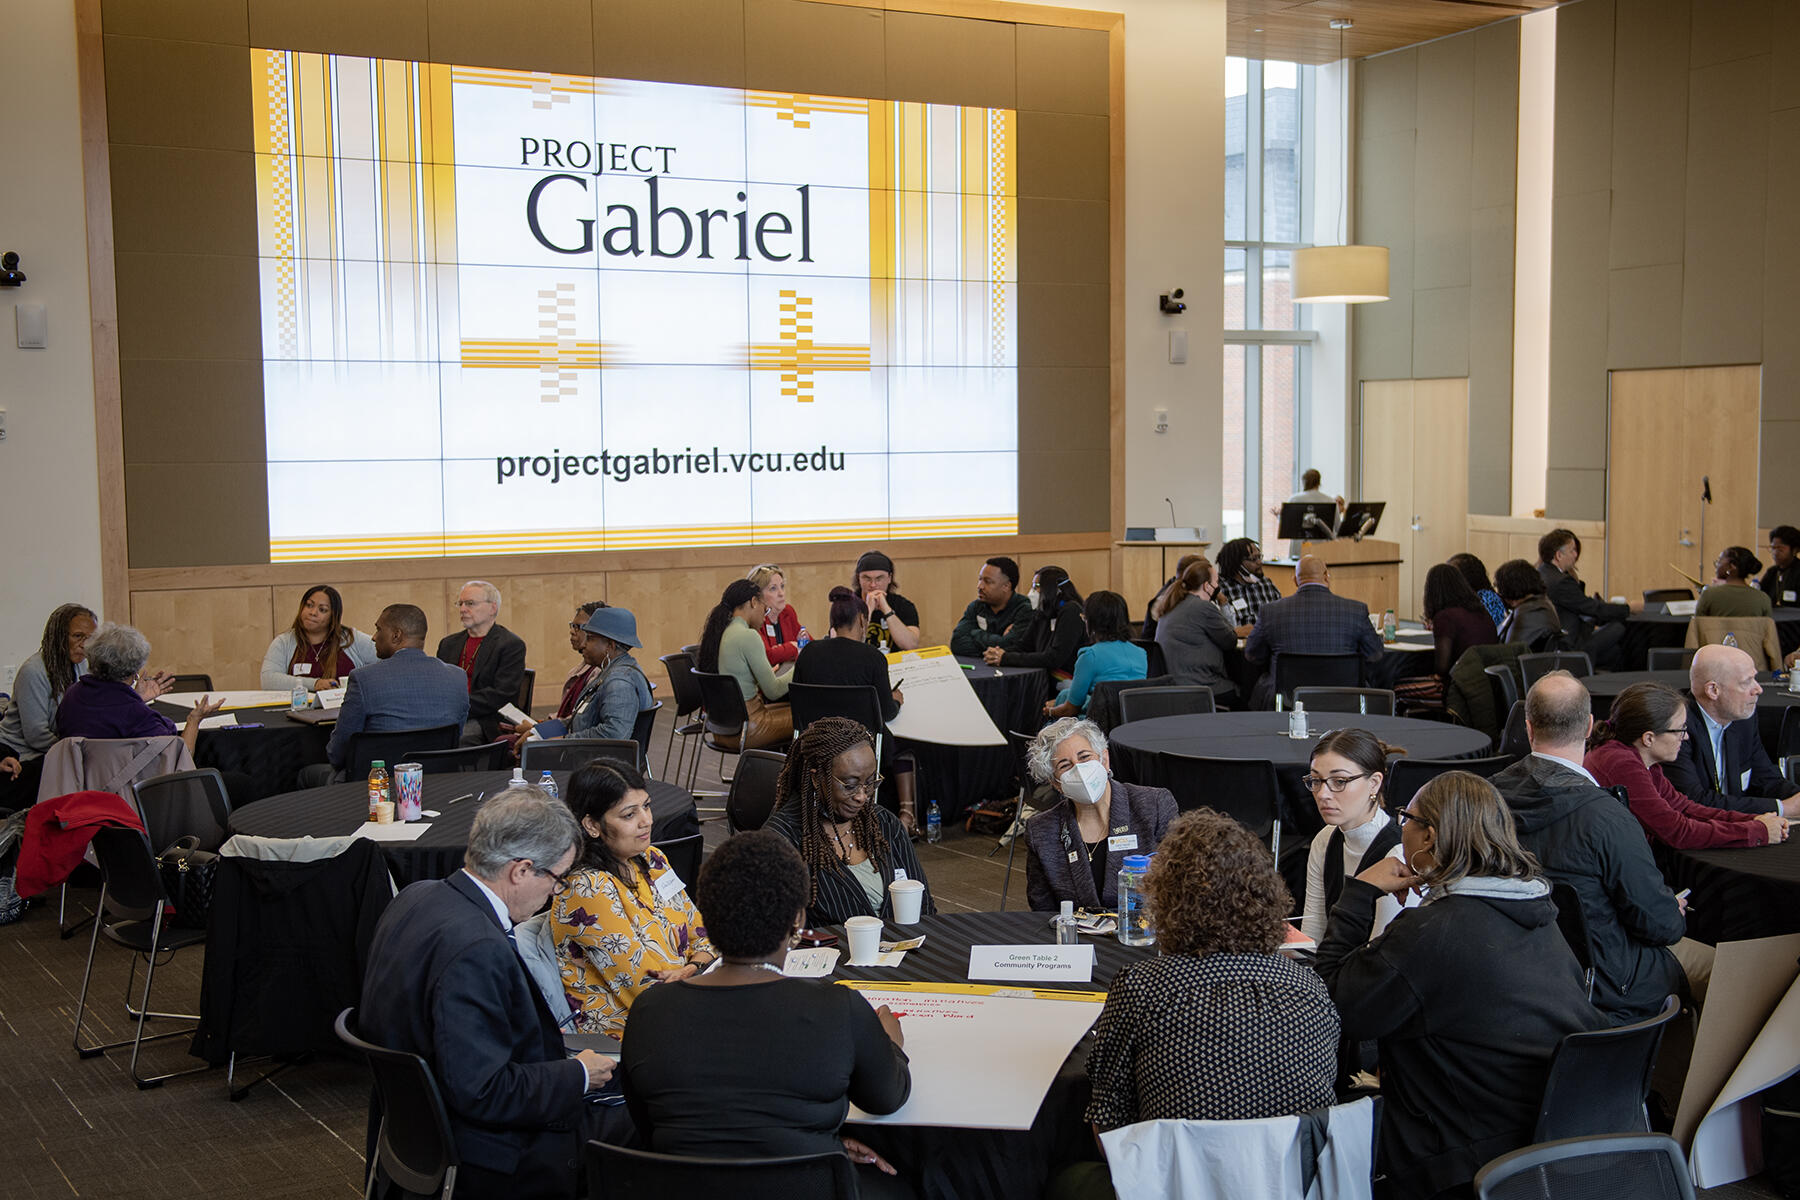 People sitting at circular tables in a large room. There is a screen that says \"PROJECT Gabriel\" behind them. 